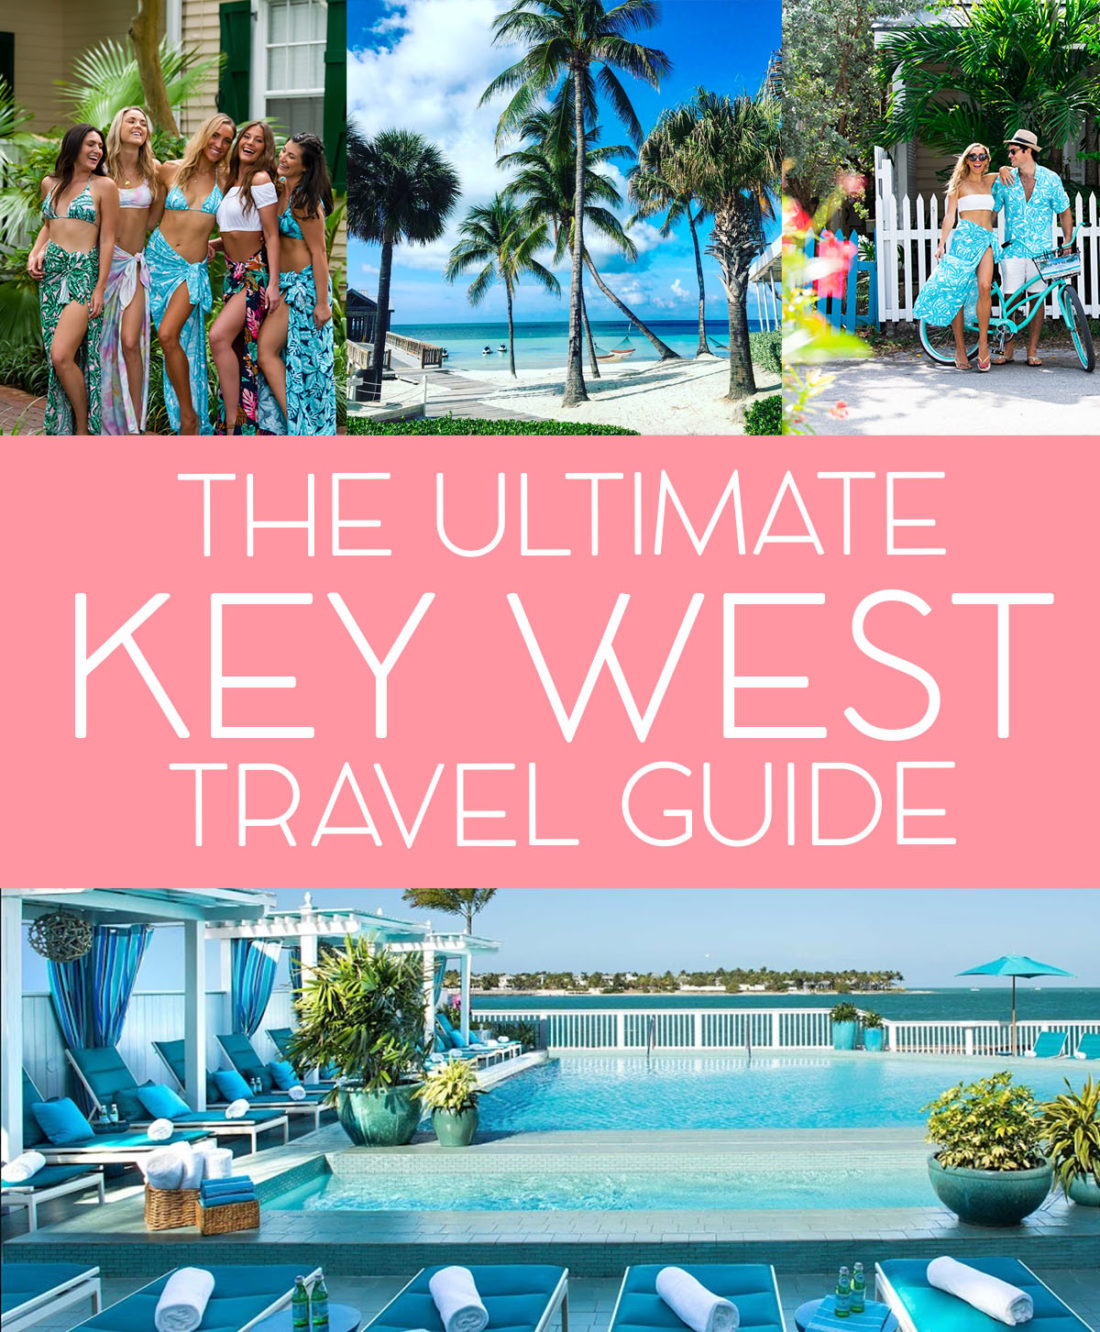 The Ultimate Luxury Travel Guide: How To Do It Safely and